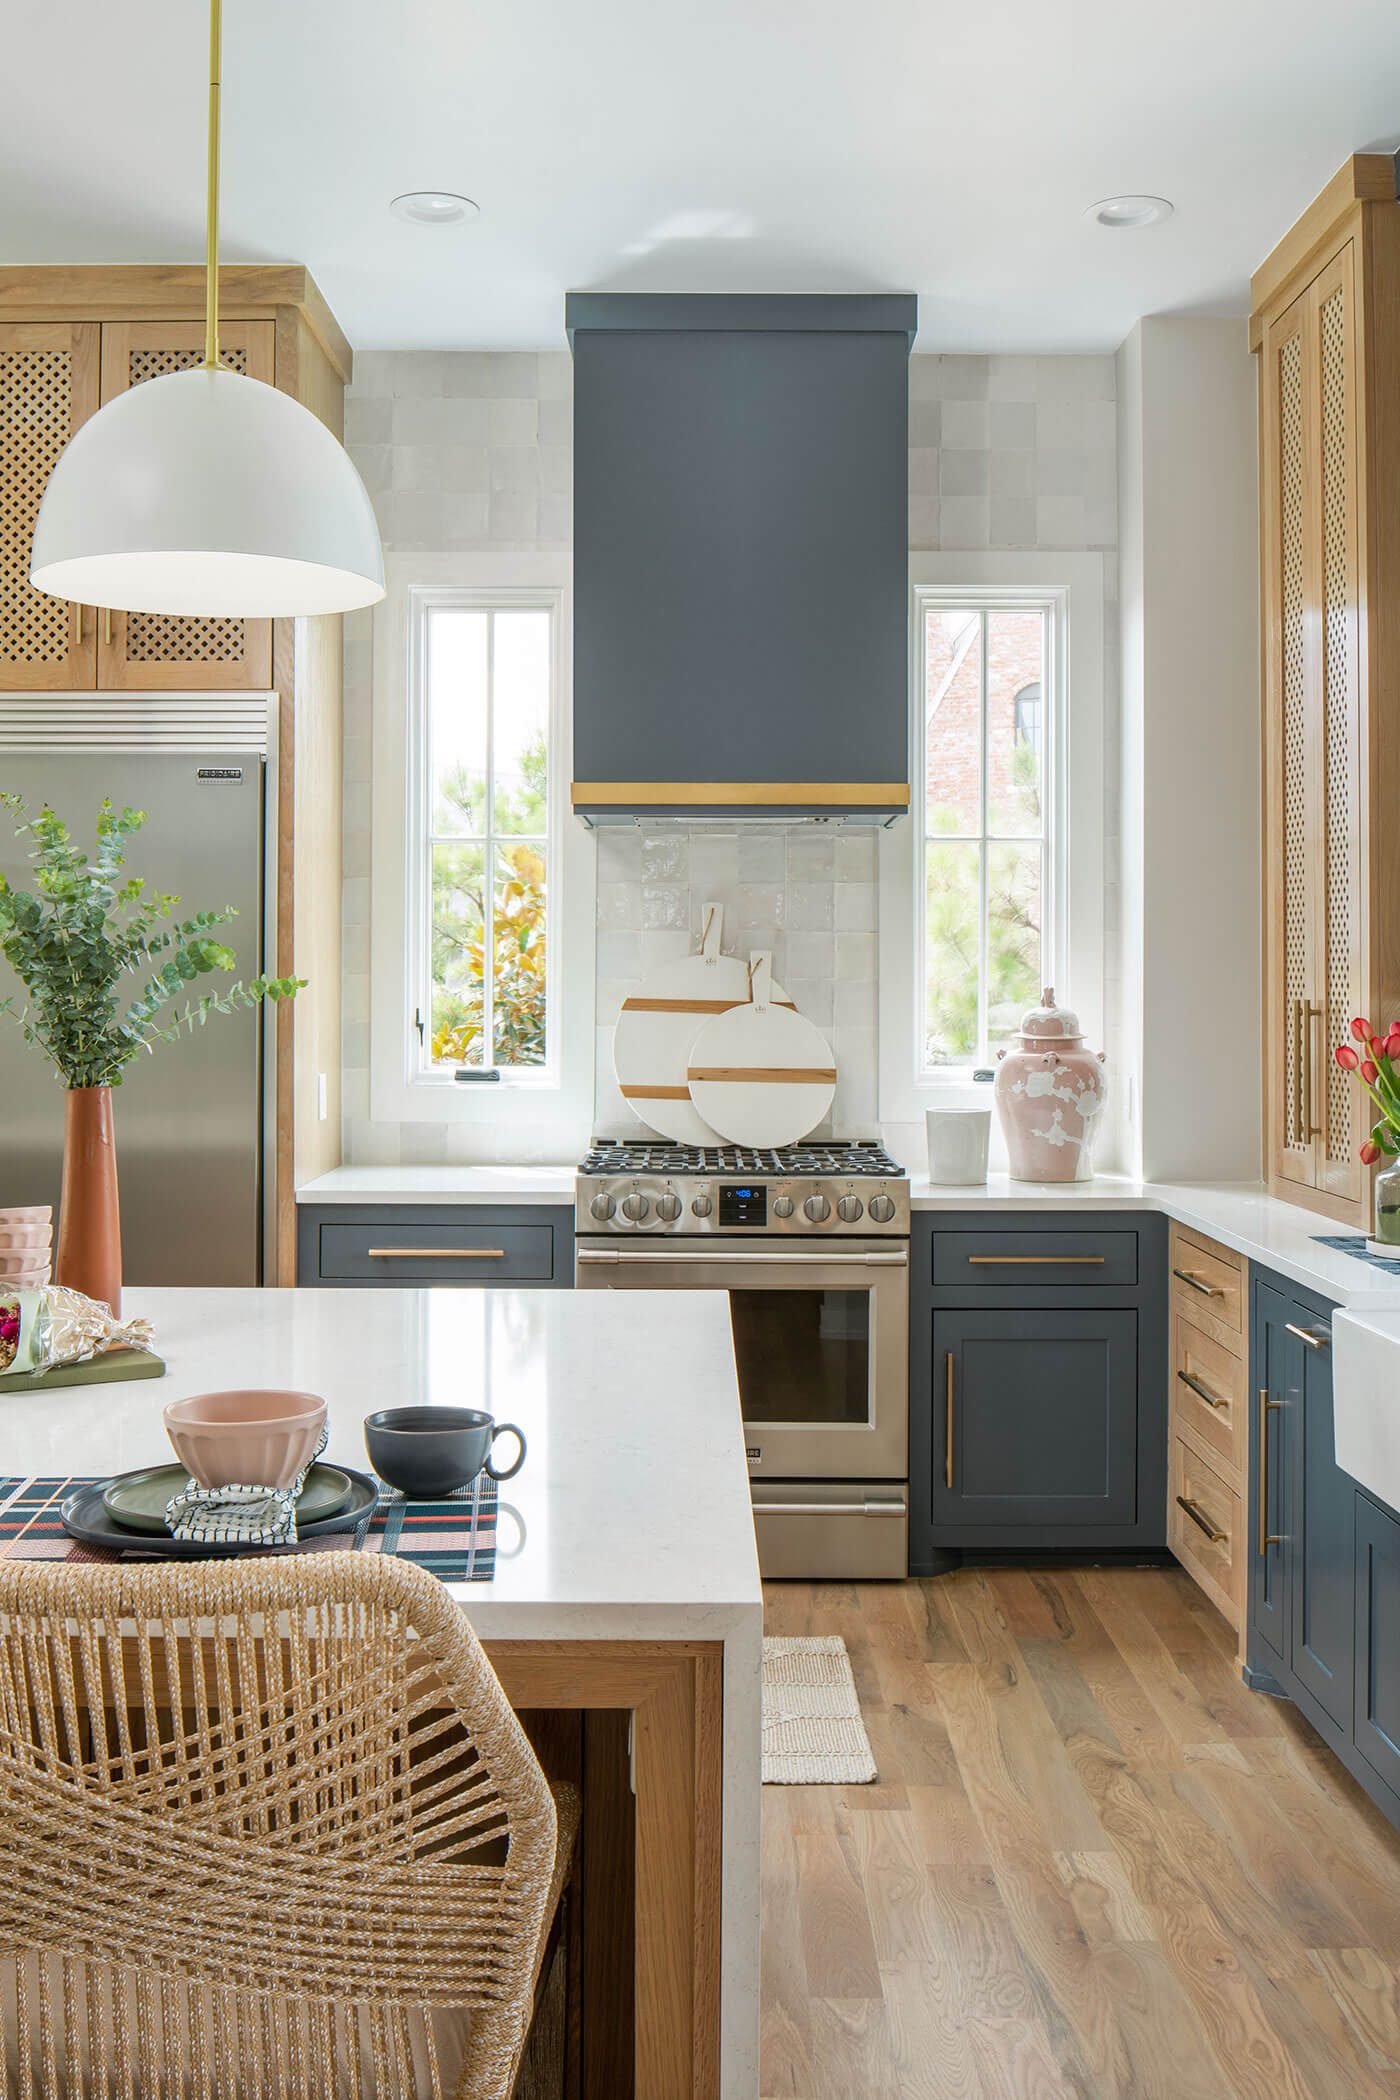 Modern farmhouse kitchen with blue and gold accents and rattan chair